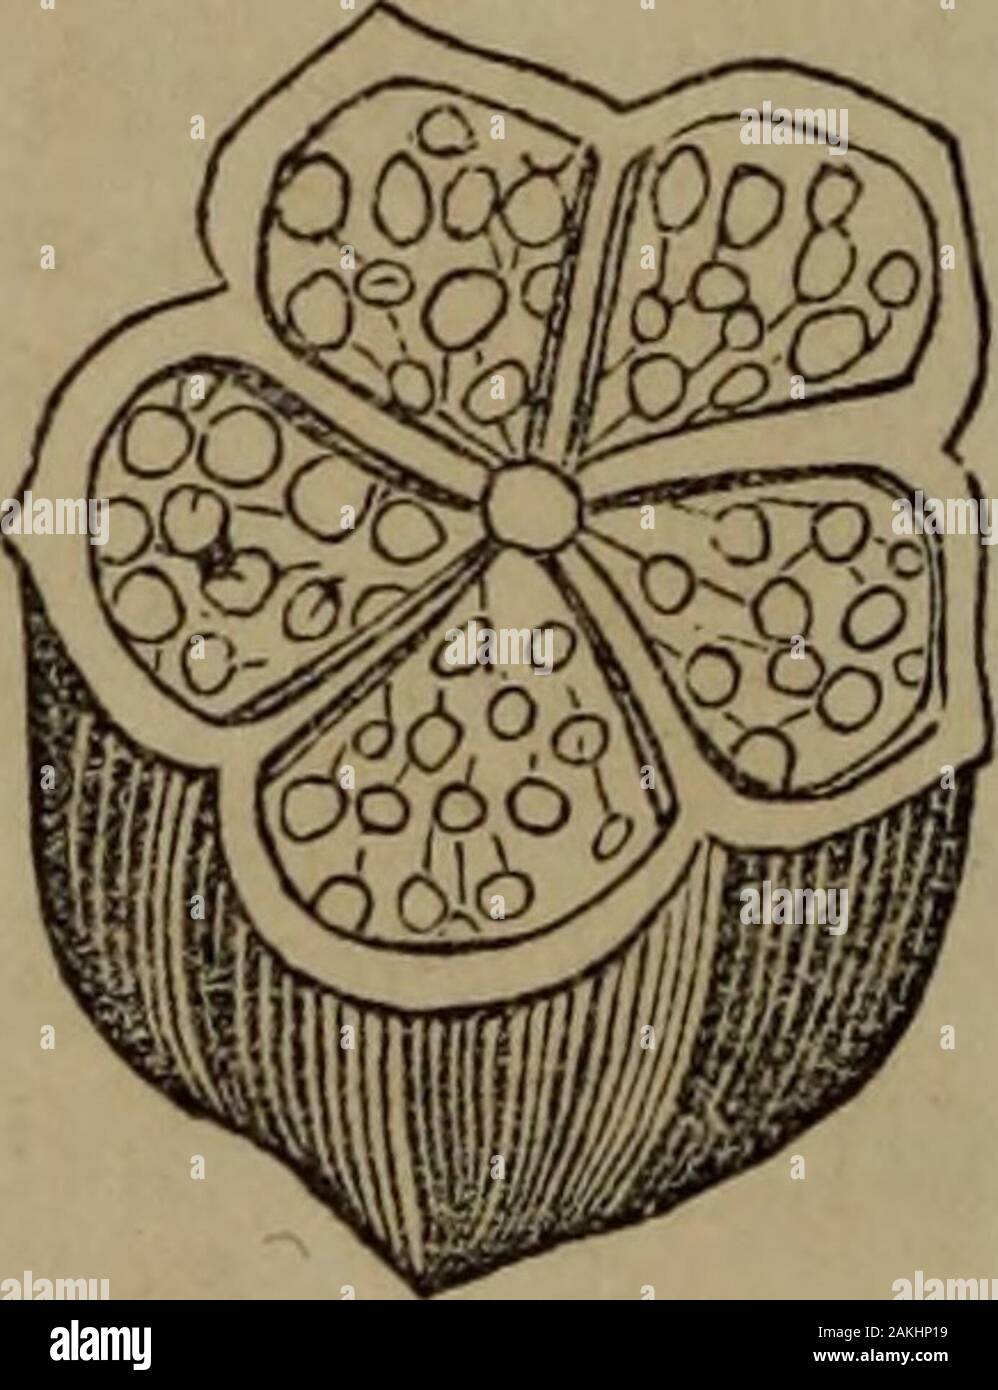 Botany of the Southern states . vary, it fol-lows that the dissepiments, however thin andmembranous they may be, in some cases, are in reality double.All true dissepiments are necessarily vertical, and never hori-zontal, since the inflected margins of leaves could not unite insuch a manner. The number of dissepiments is always equal tothe number of carpels of which the ovary is composed, and thedissepiments are always alternate with the stigmas. A simpleovary can have no dissepiment. Should any fruit be observedwith dissepiments not reconcilable to the above principles, they arecalled spurious Stock Photo